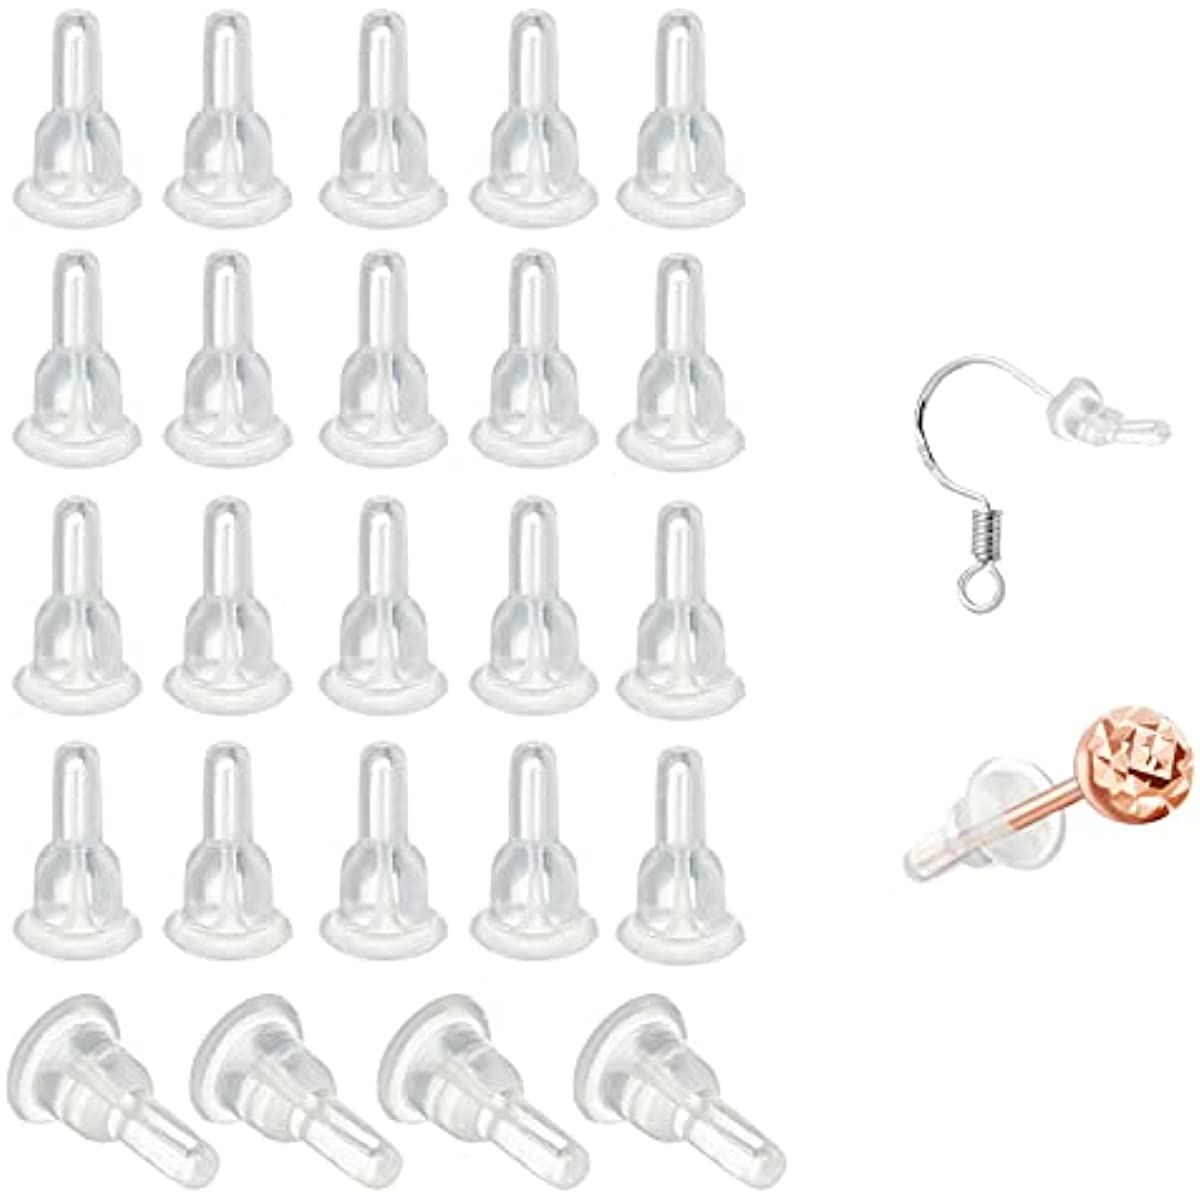 100 Pcs Clear Silicone Earring Backs Hypoallergenic Secure Push